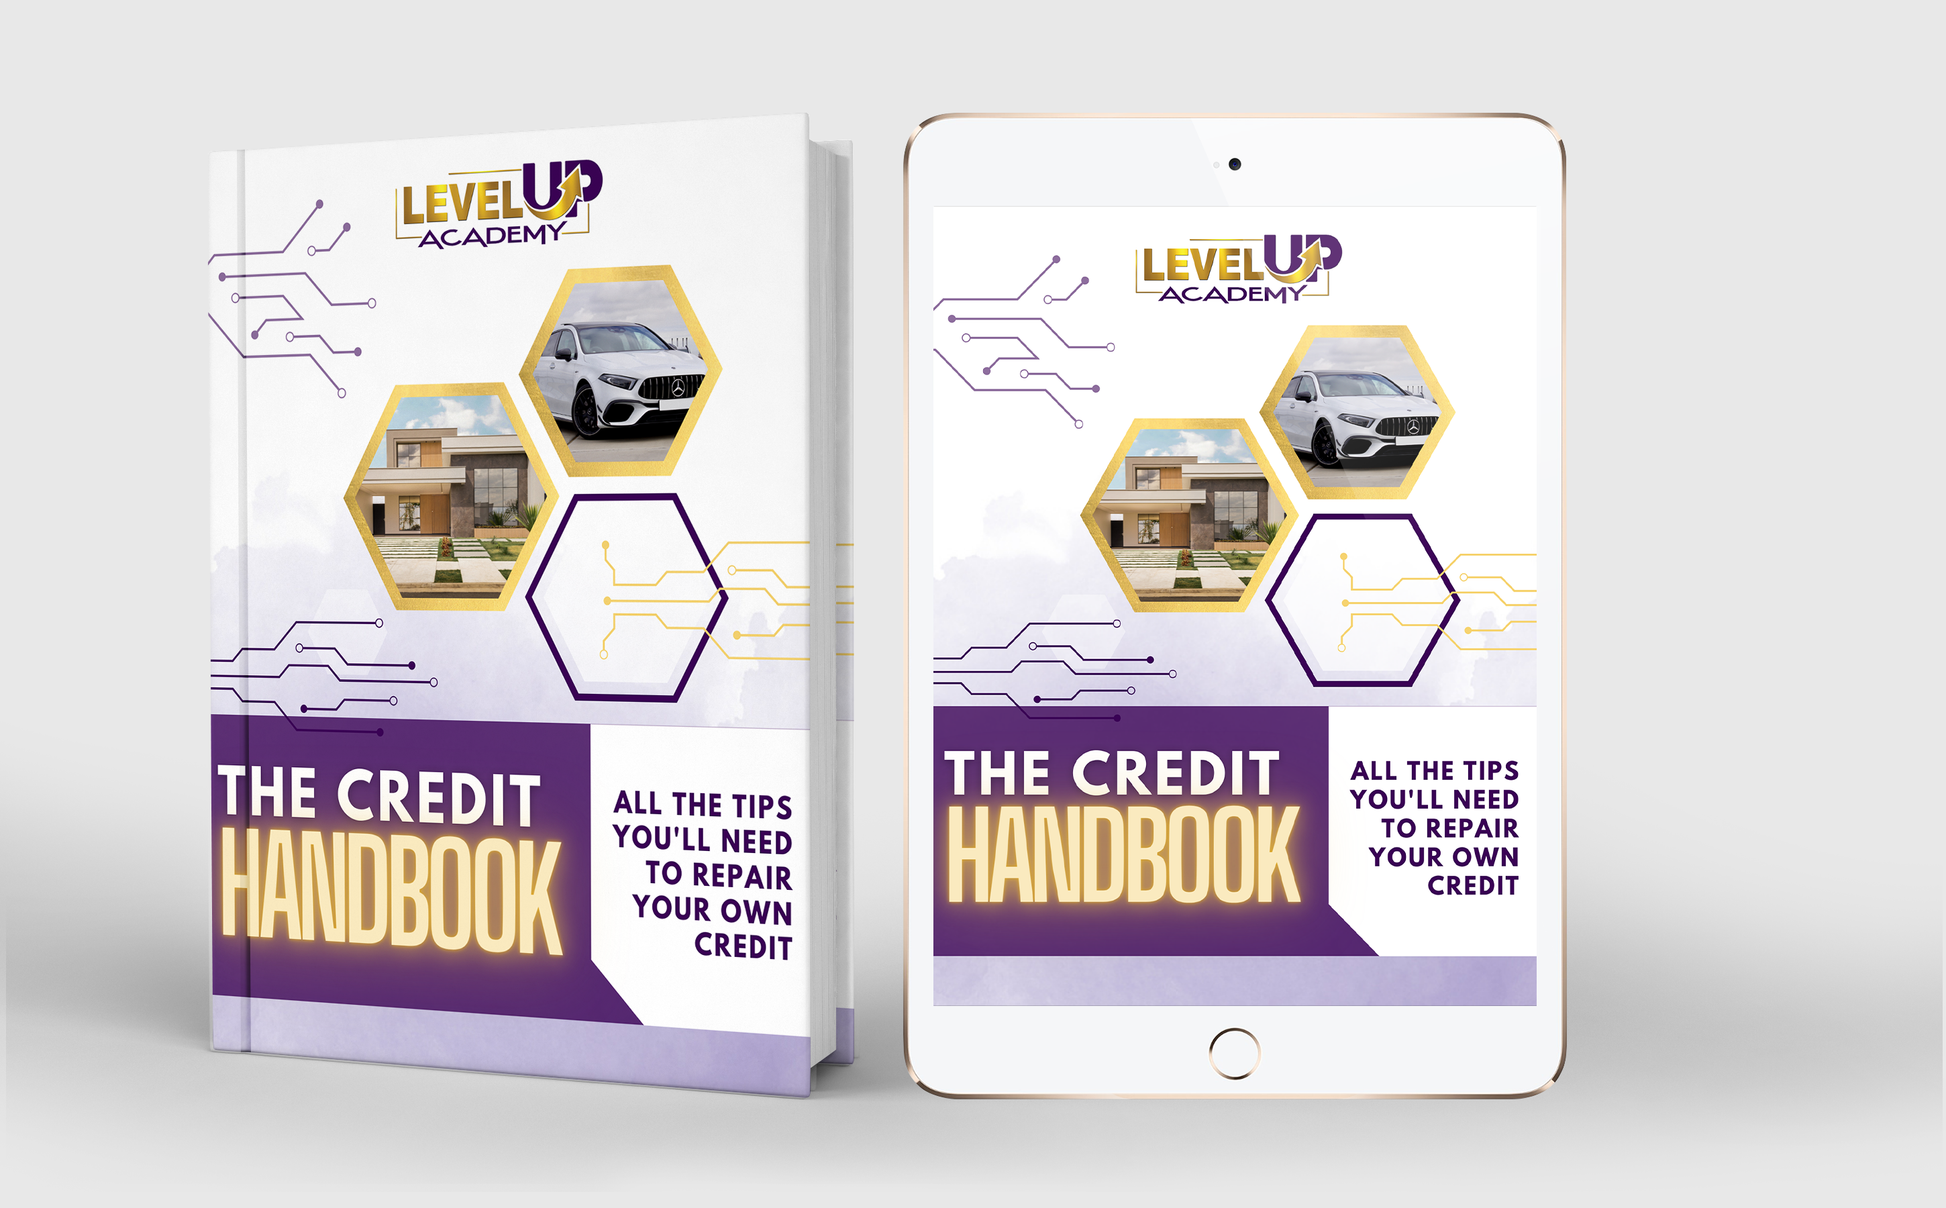 The Credit Handbook | Get Top-Rated & Best Online Incorporation Services | Best Business Formation & Incorporation Options at LEVEL UP ACADEMY